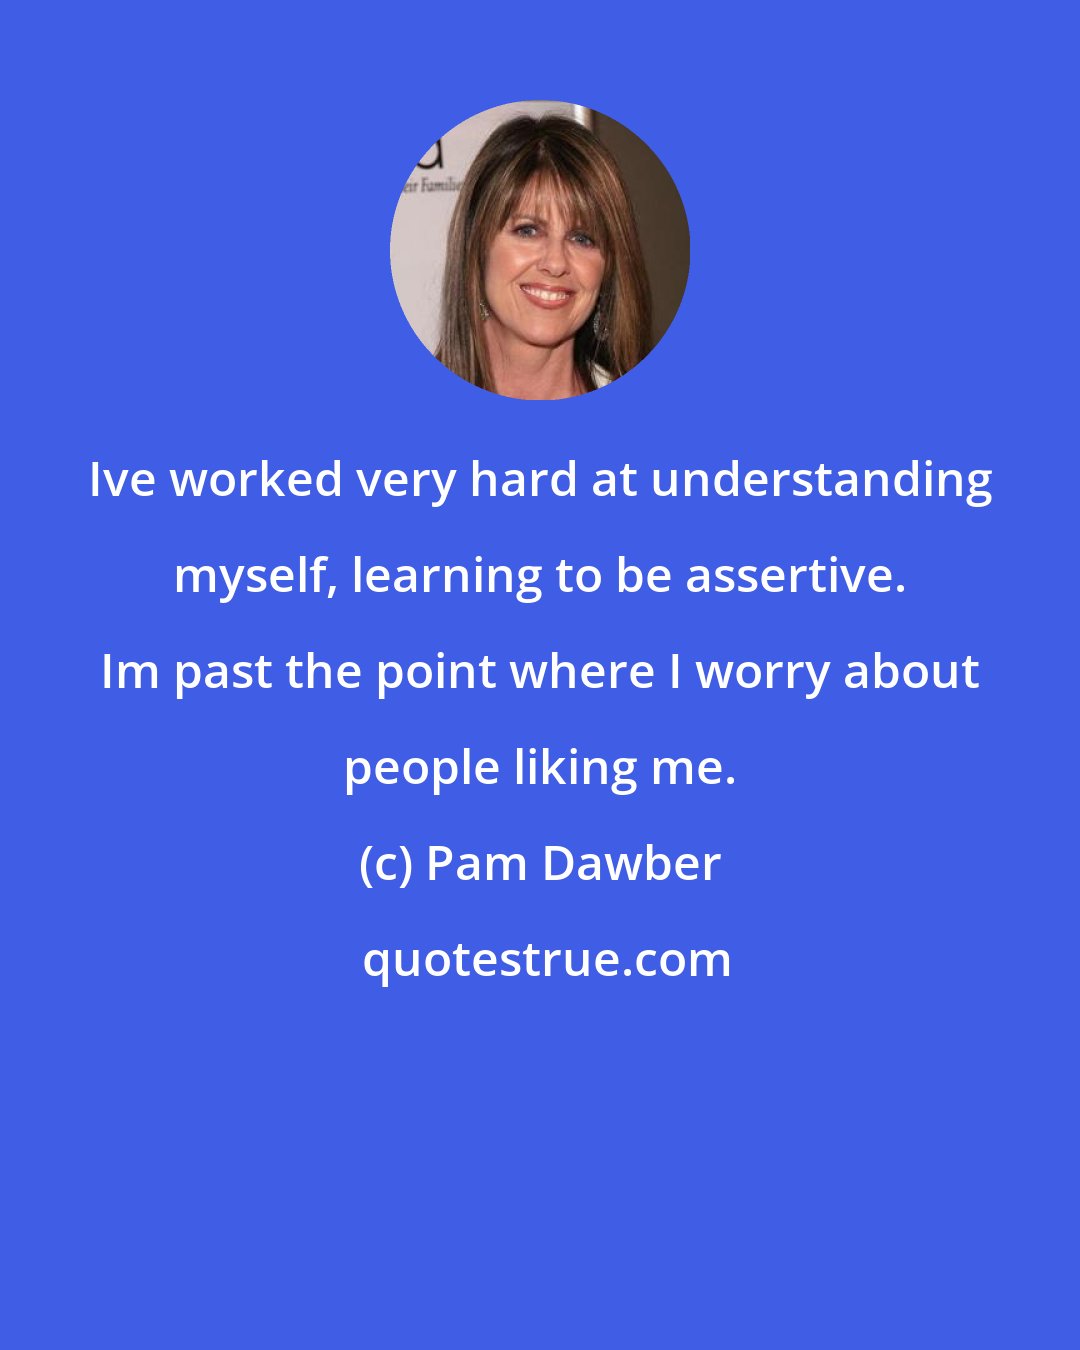 Pam Dawber: Ive worked very hard at understanding myself, learning to be assertive. Im past the point where I worry about people liking me.